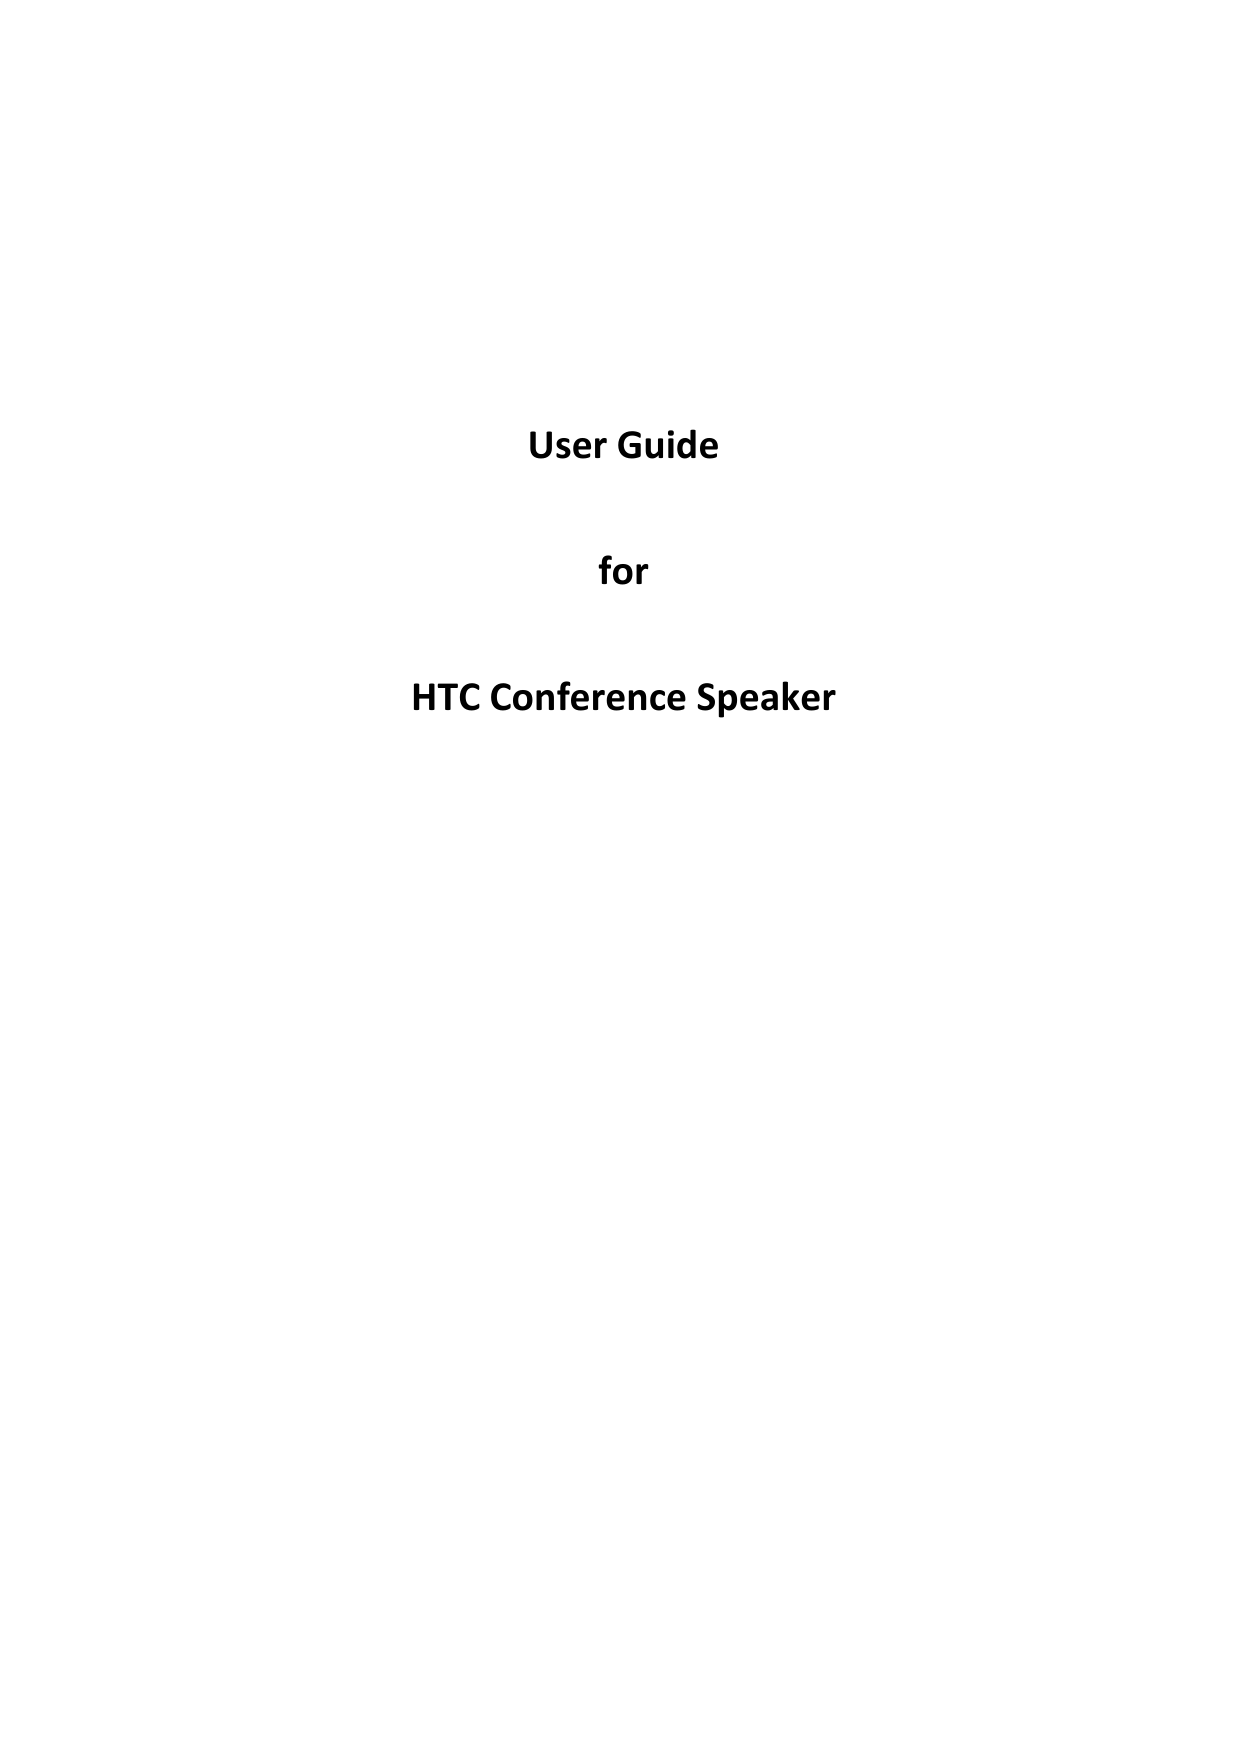        User Guide for HTC Conference Speaker                  